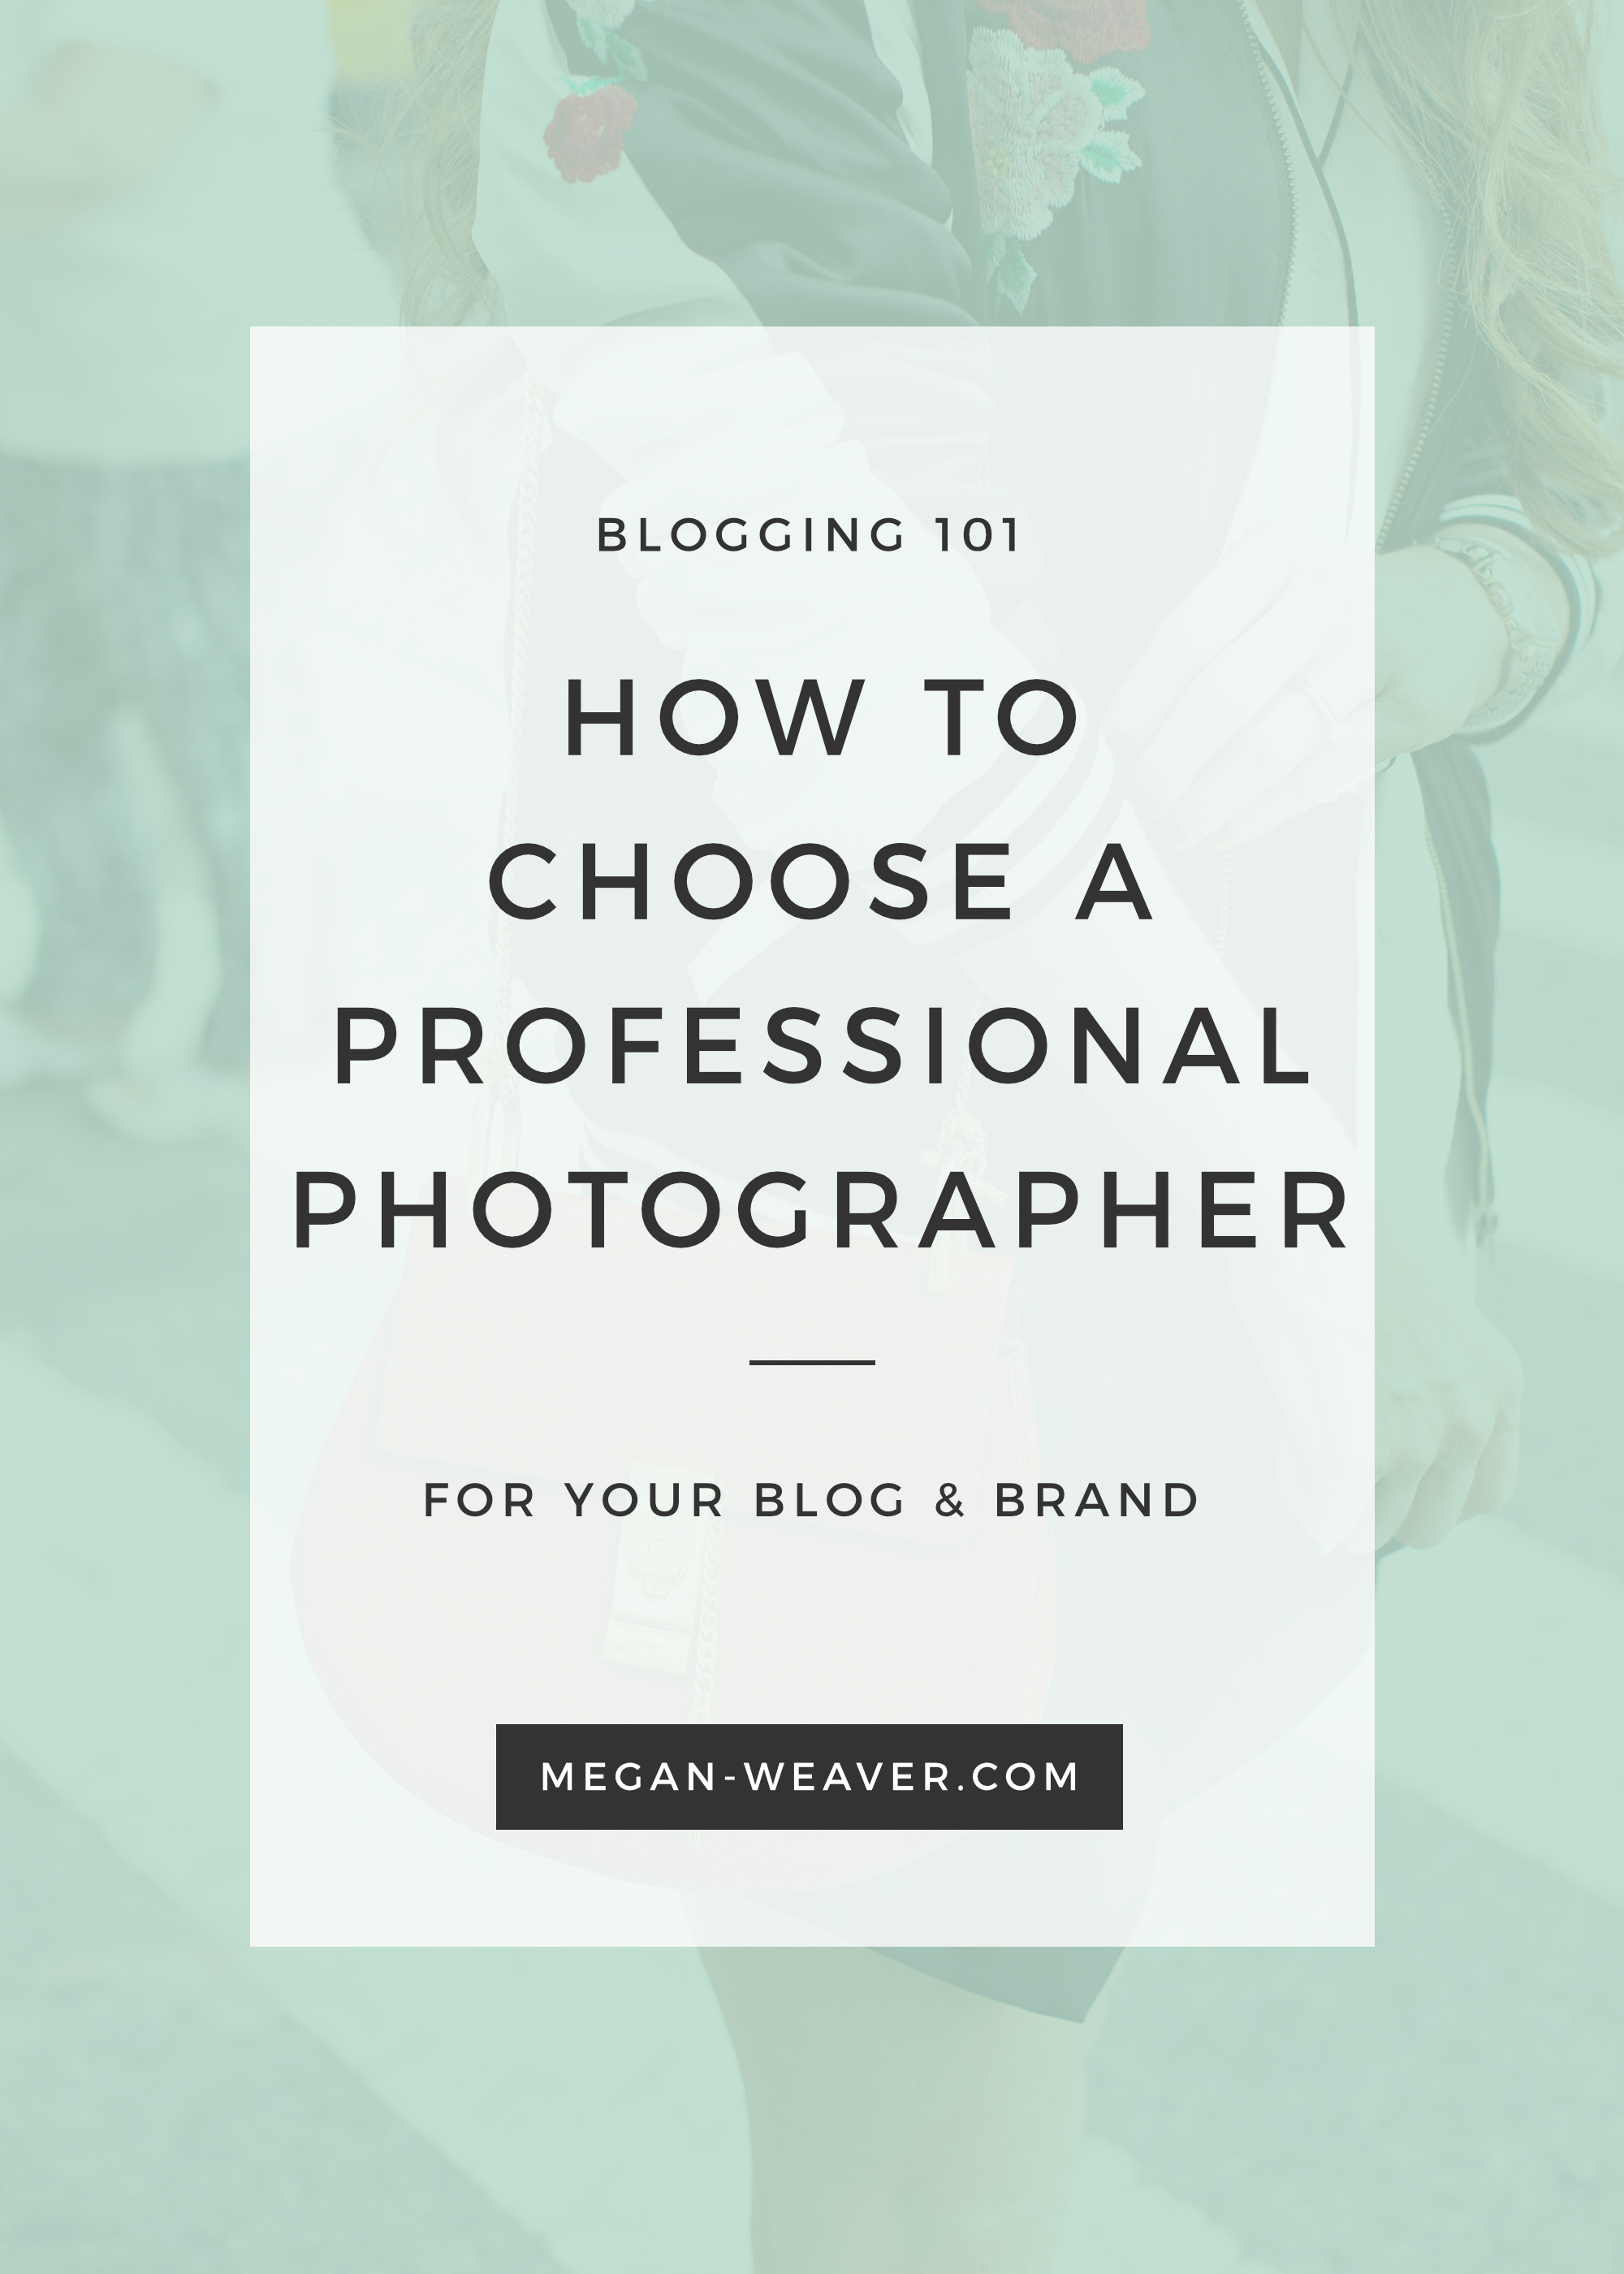 If you'd like to take your blog or business to the next level, I'm sharing my tips on finding and hiring a professional photographer for your brand!